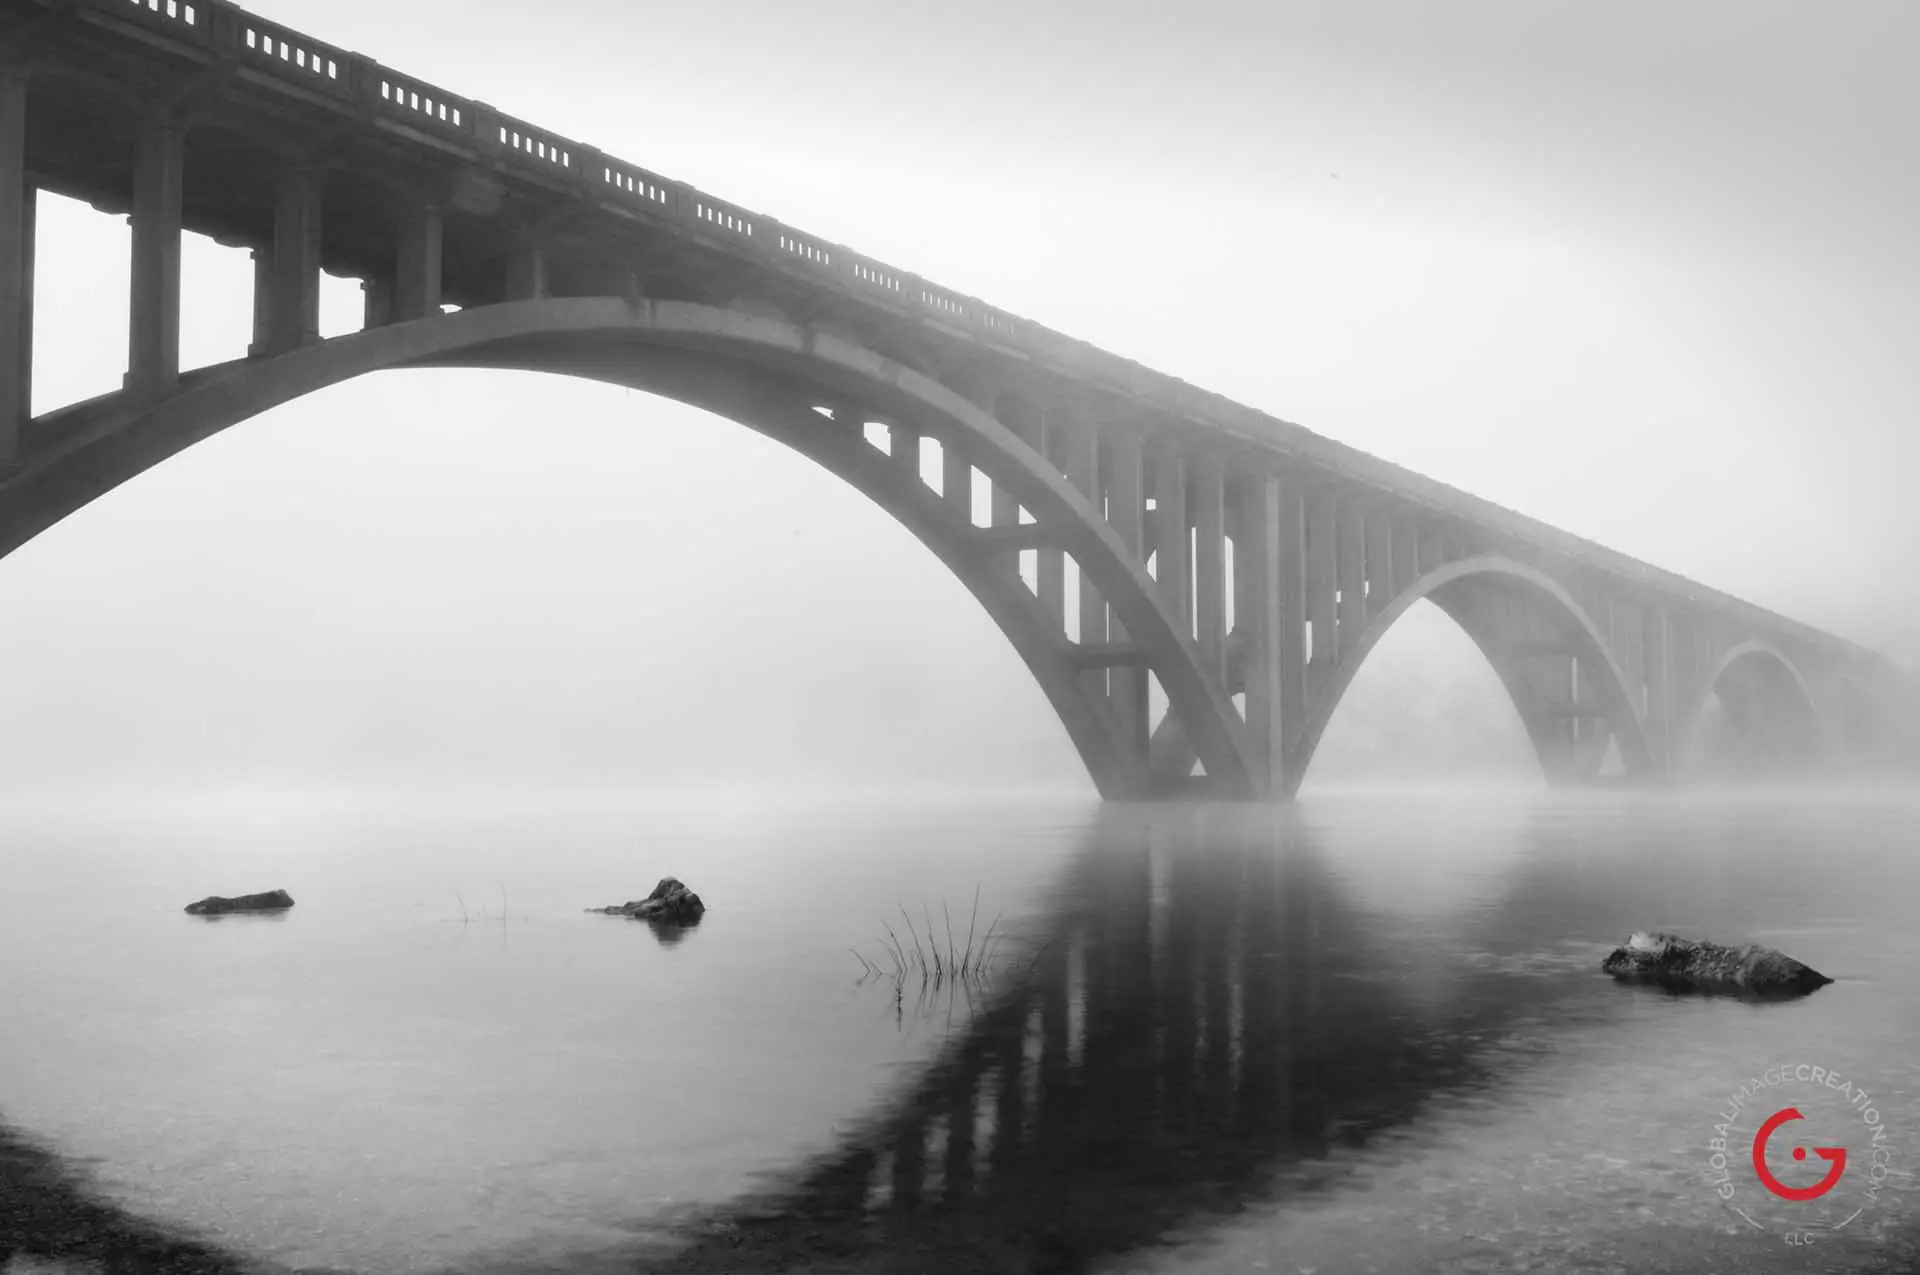 Early morning fog casts the downtown Branson bridge in dim ghostly light while the water on lake Tanycomo reflects like a mirror. - Advertising photographers in Branson Missouri, Branson Missouri photography